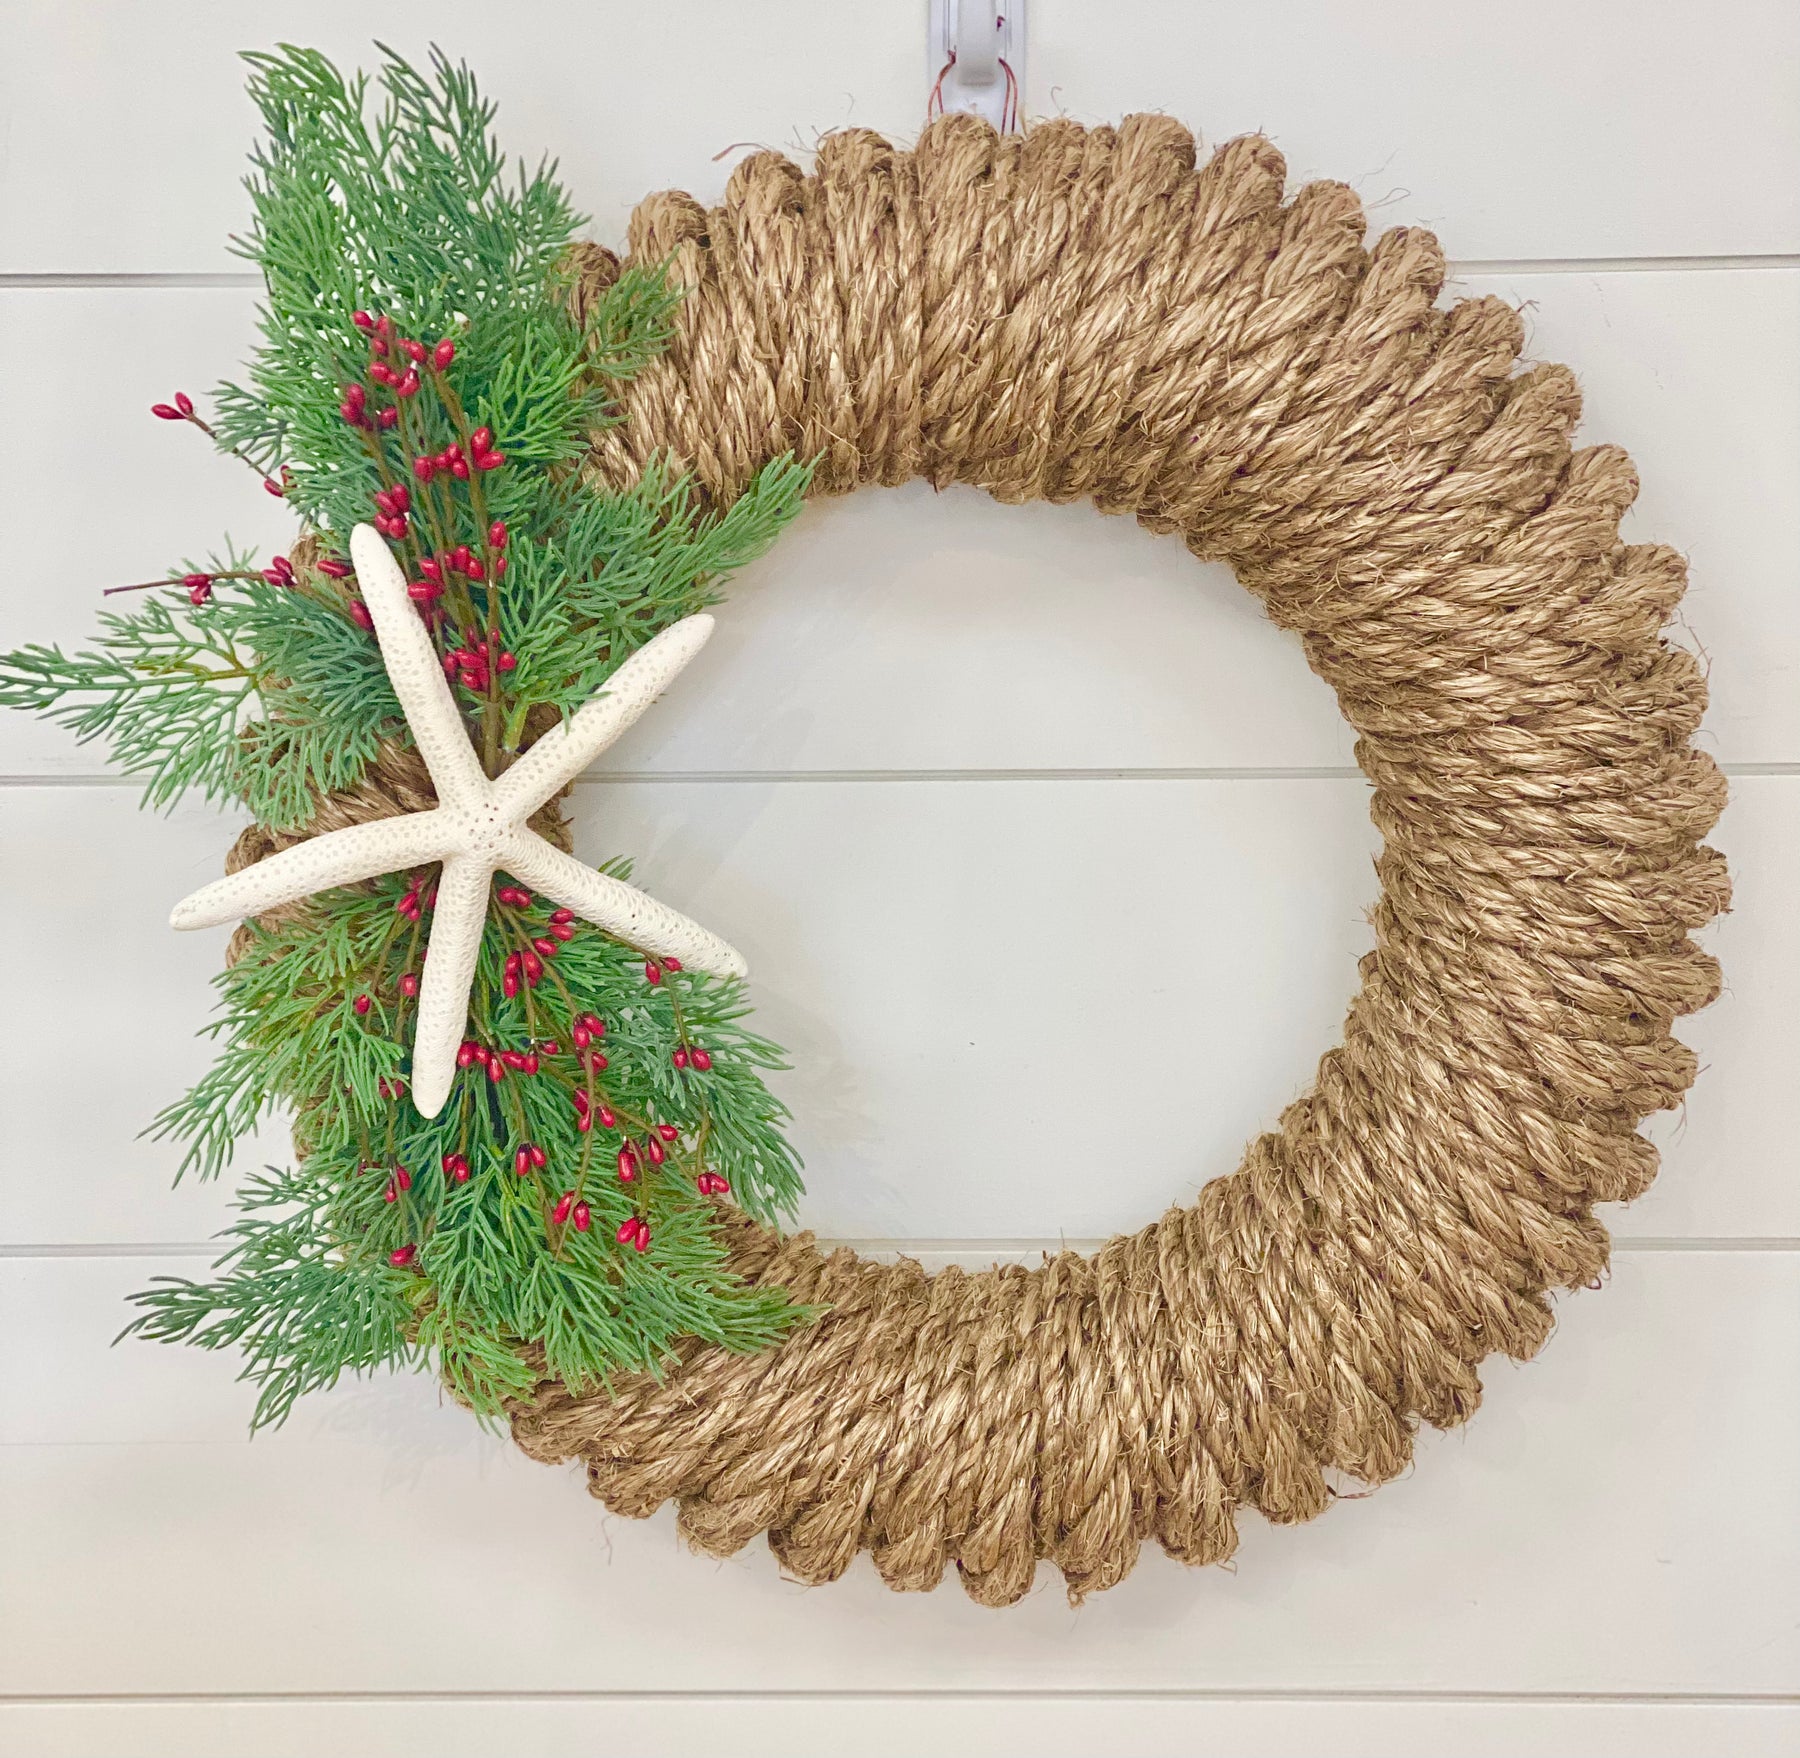 Newport Rope Wreath – White Cottage